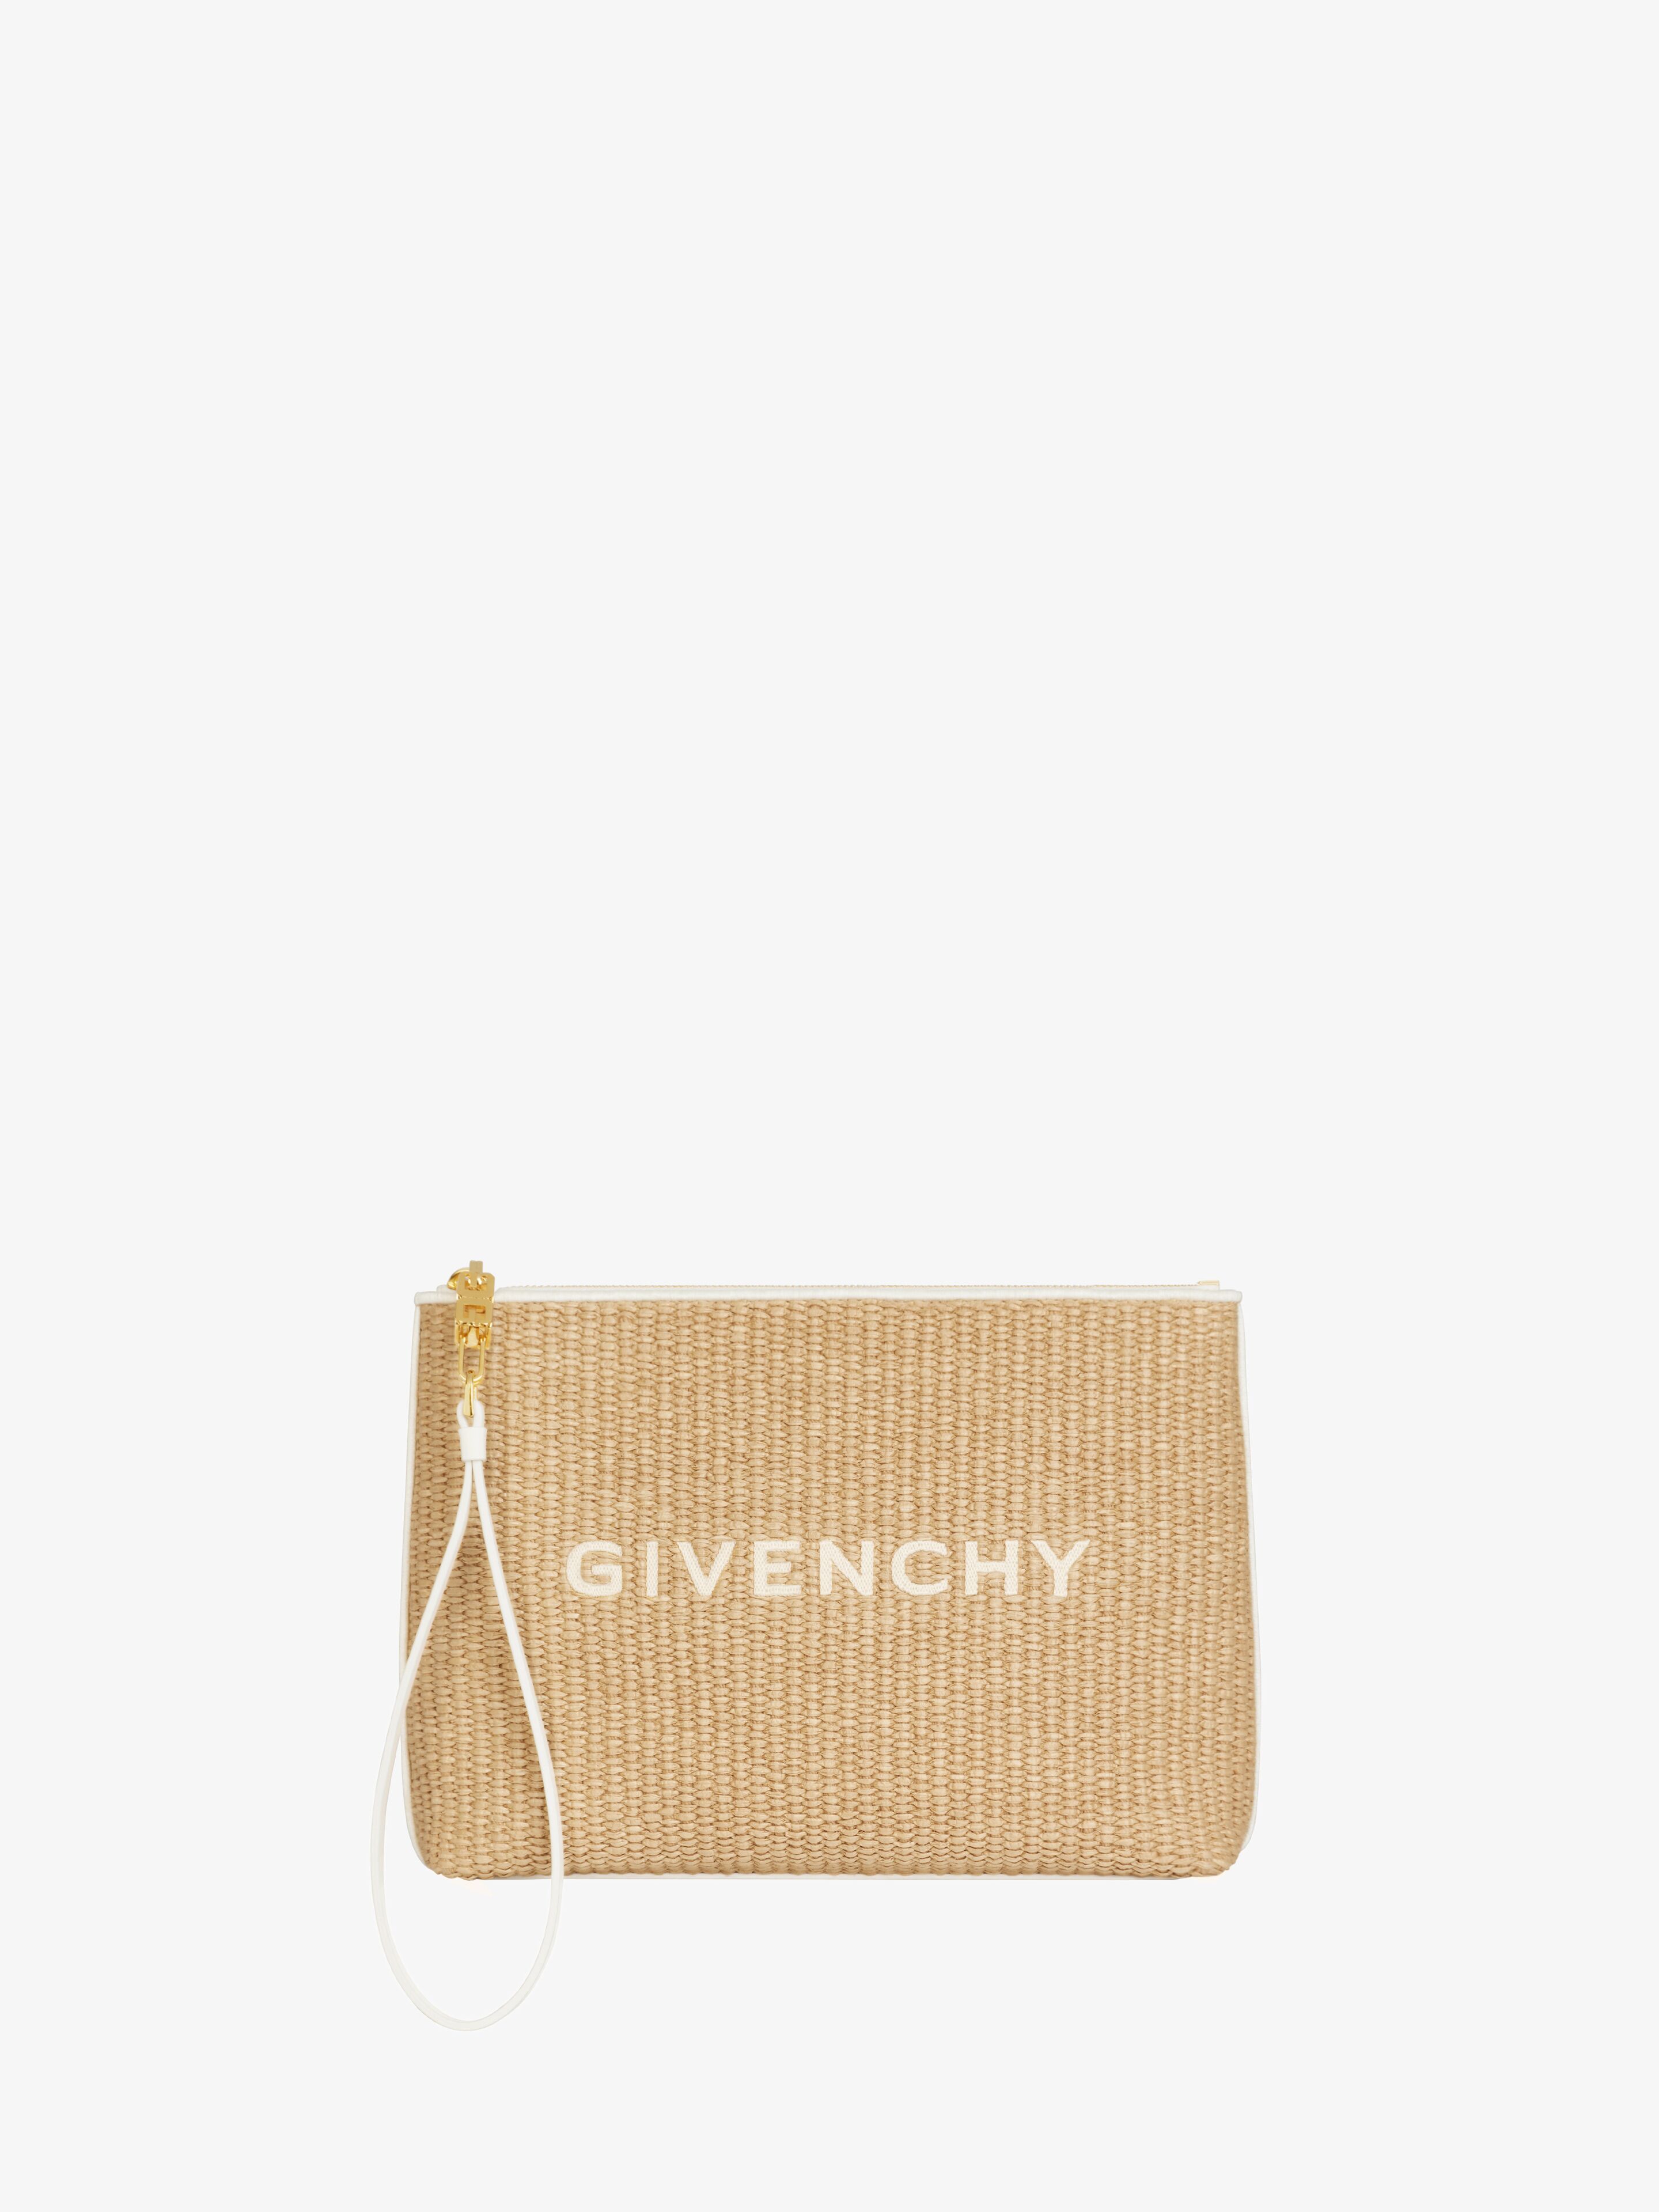 Givenchy Travel Pouch In Raffia In White